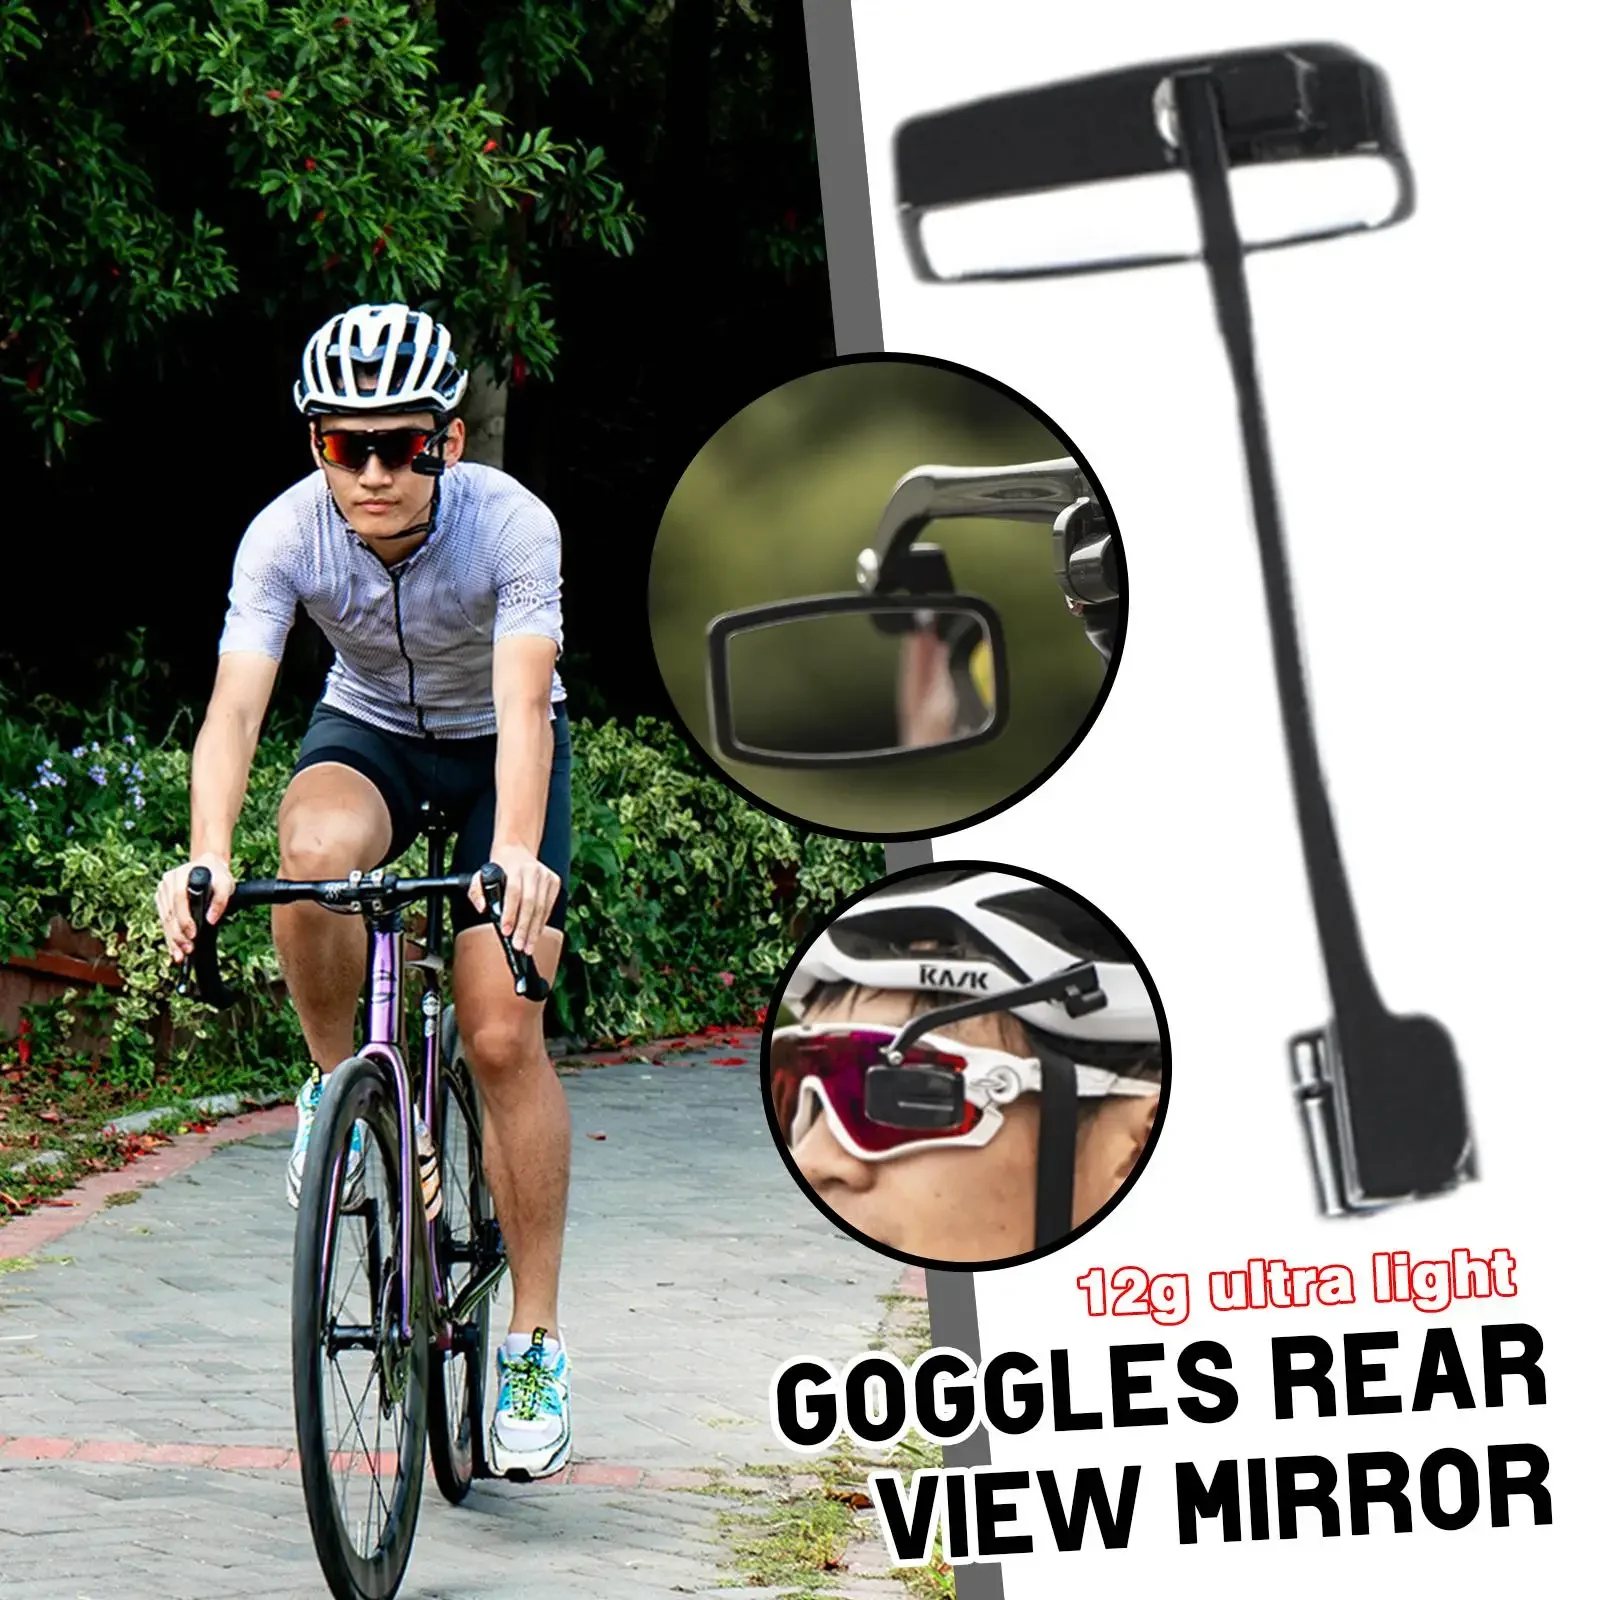 

1pc Bike Bicycle Cycling Riding Glasses Rear View Mirror 360 Rearview Adjustment Rear View Eyeglass Mount Helmet